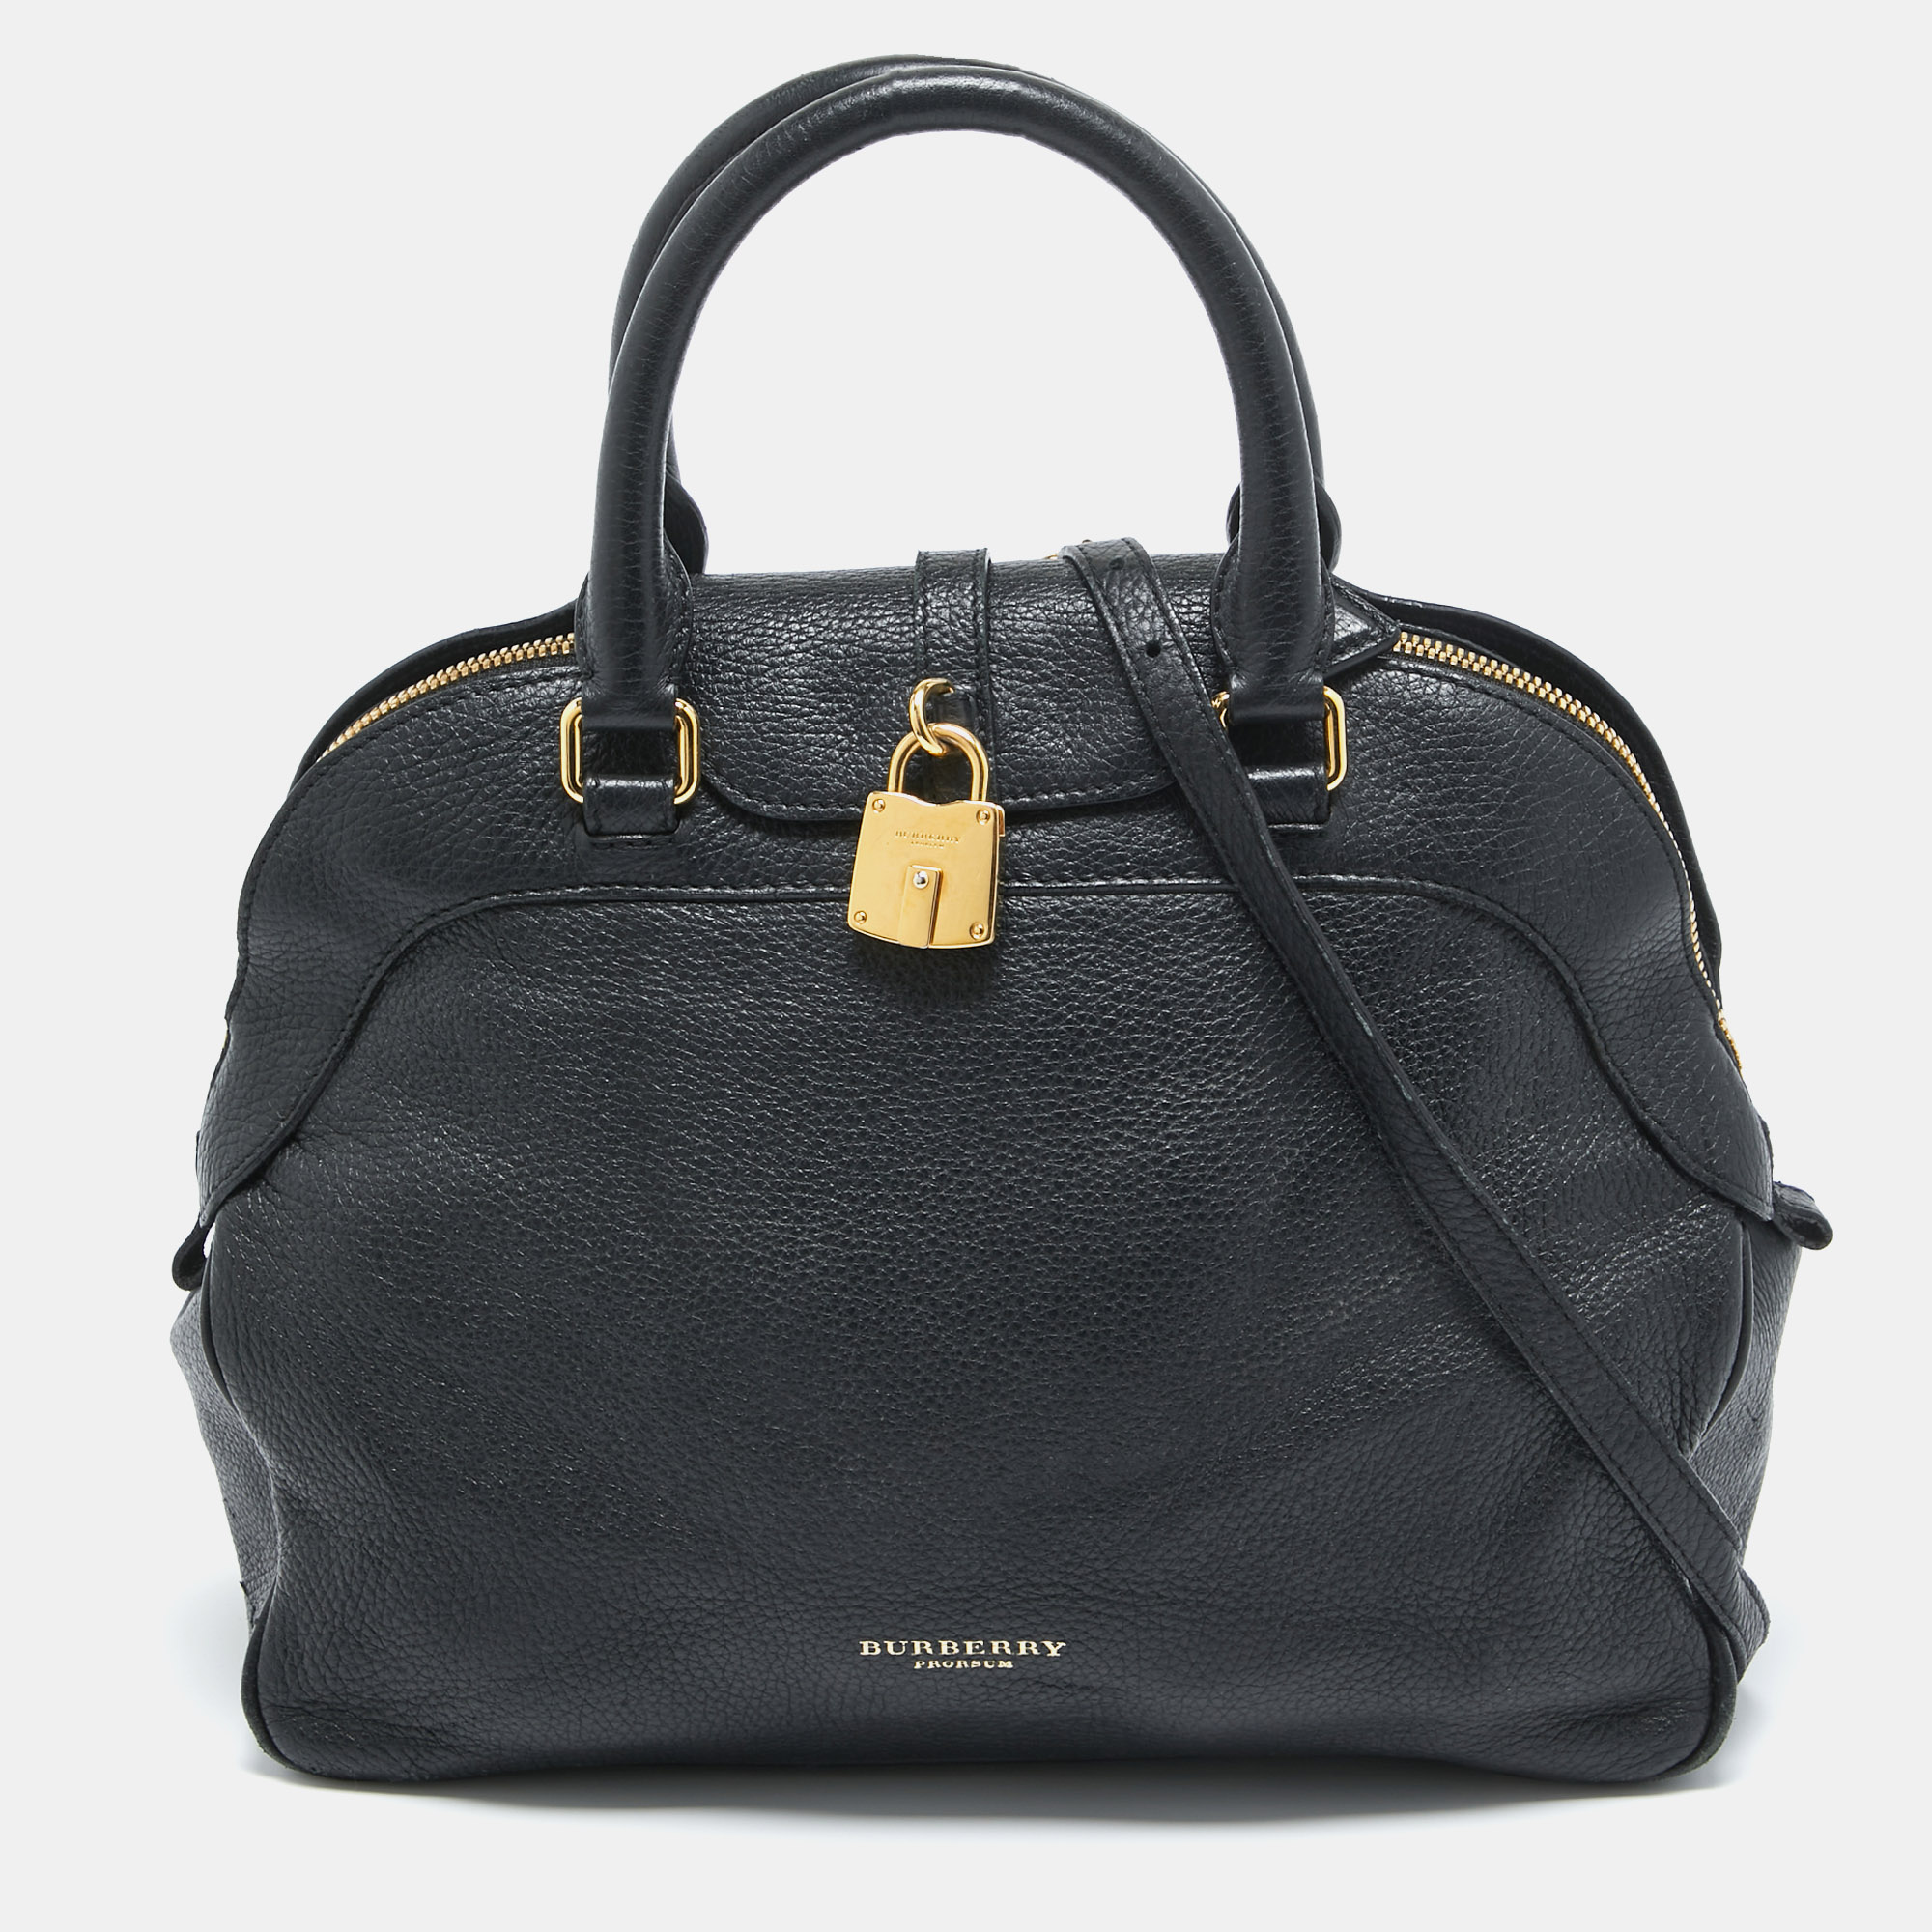 If you are looking for something that reflects chic and luxury then this satchel is a perfect choice. Crafted from premium materials it can be conveniently carried around and its interior is spaciously sized to house your belongings with ease.